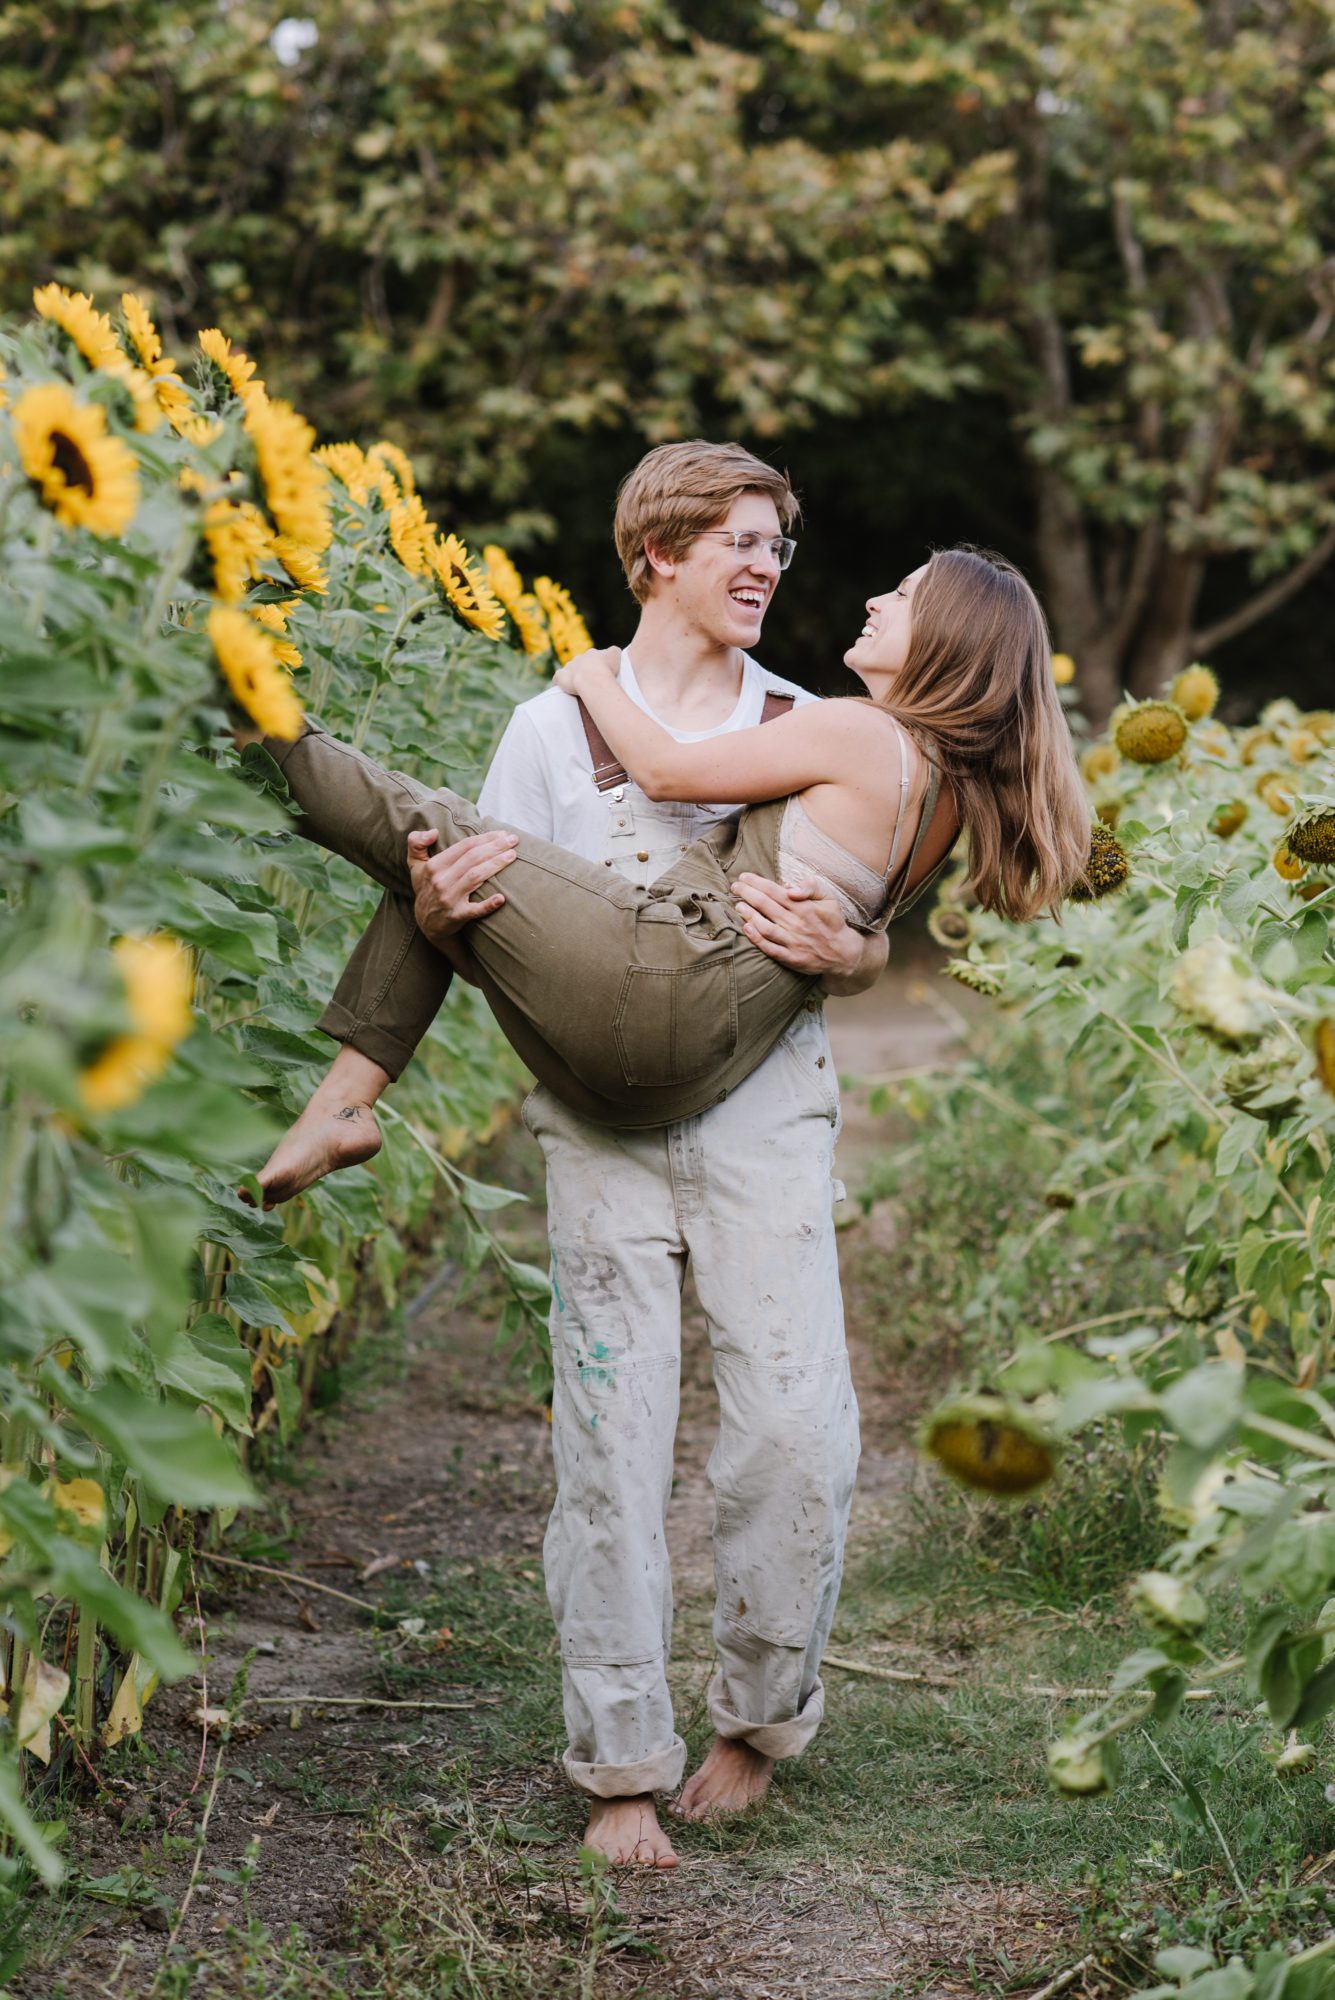 Man carrying girl in his arms at engagement session